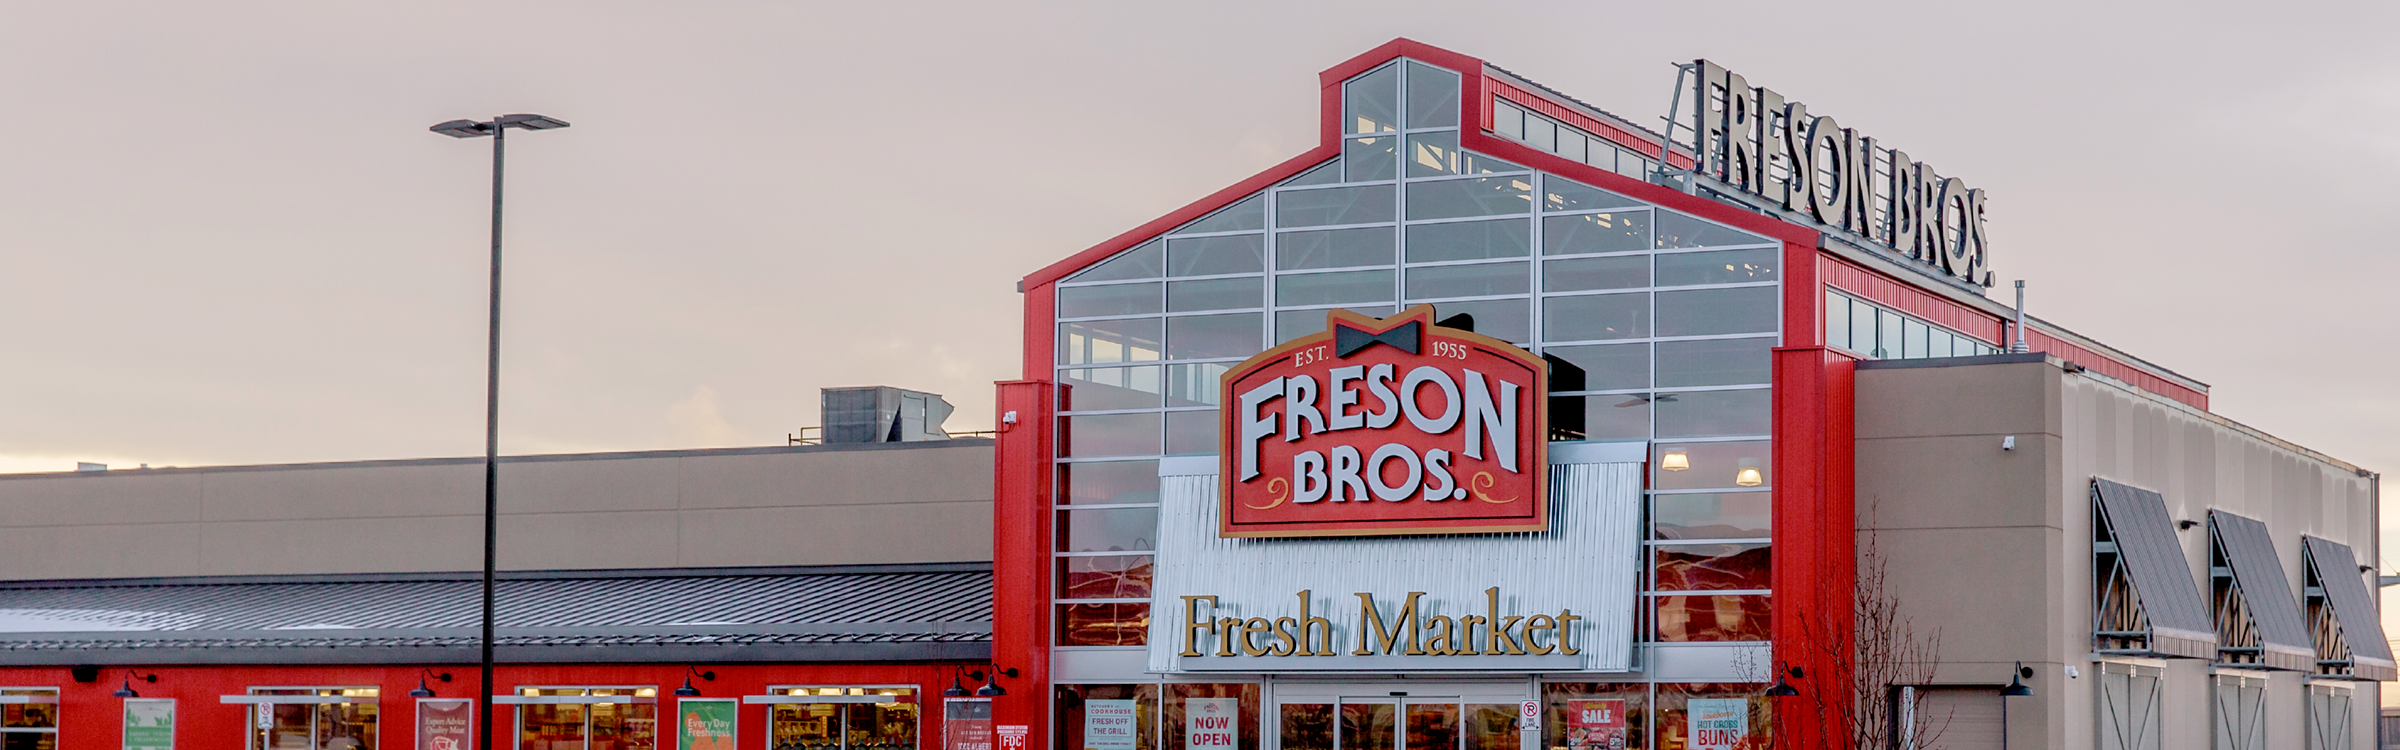 Freson Bros - Grocery Store